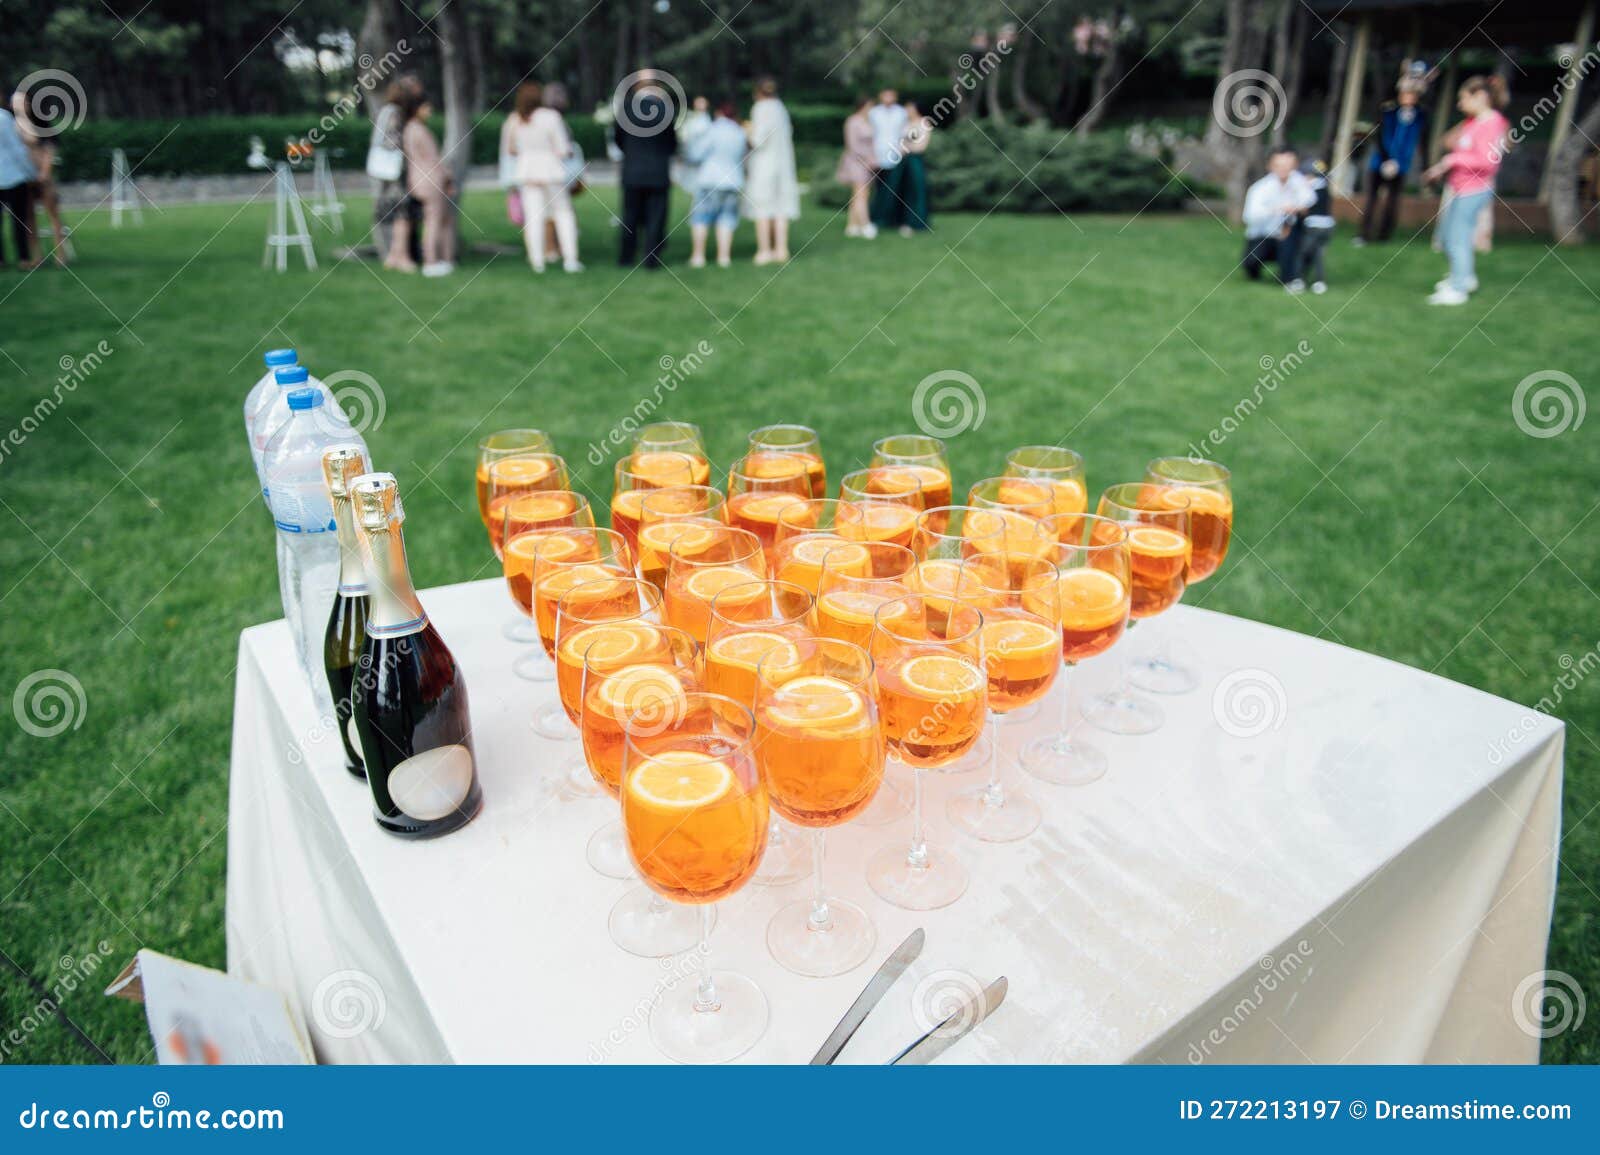 A Lot Of Glasses With Apple And Orange Juice On The Buffet Table Stock Image Image Of Beverage